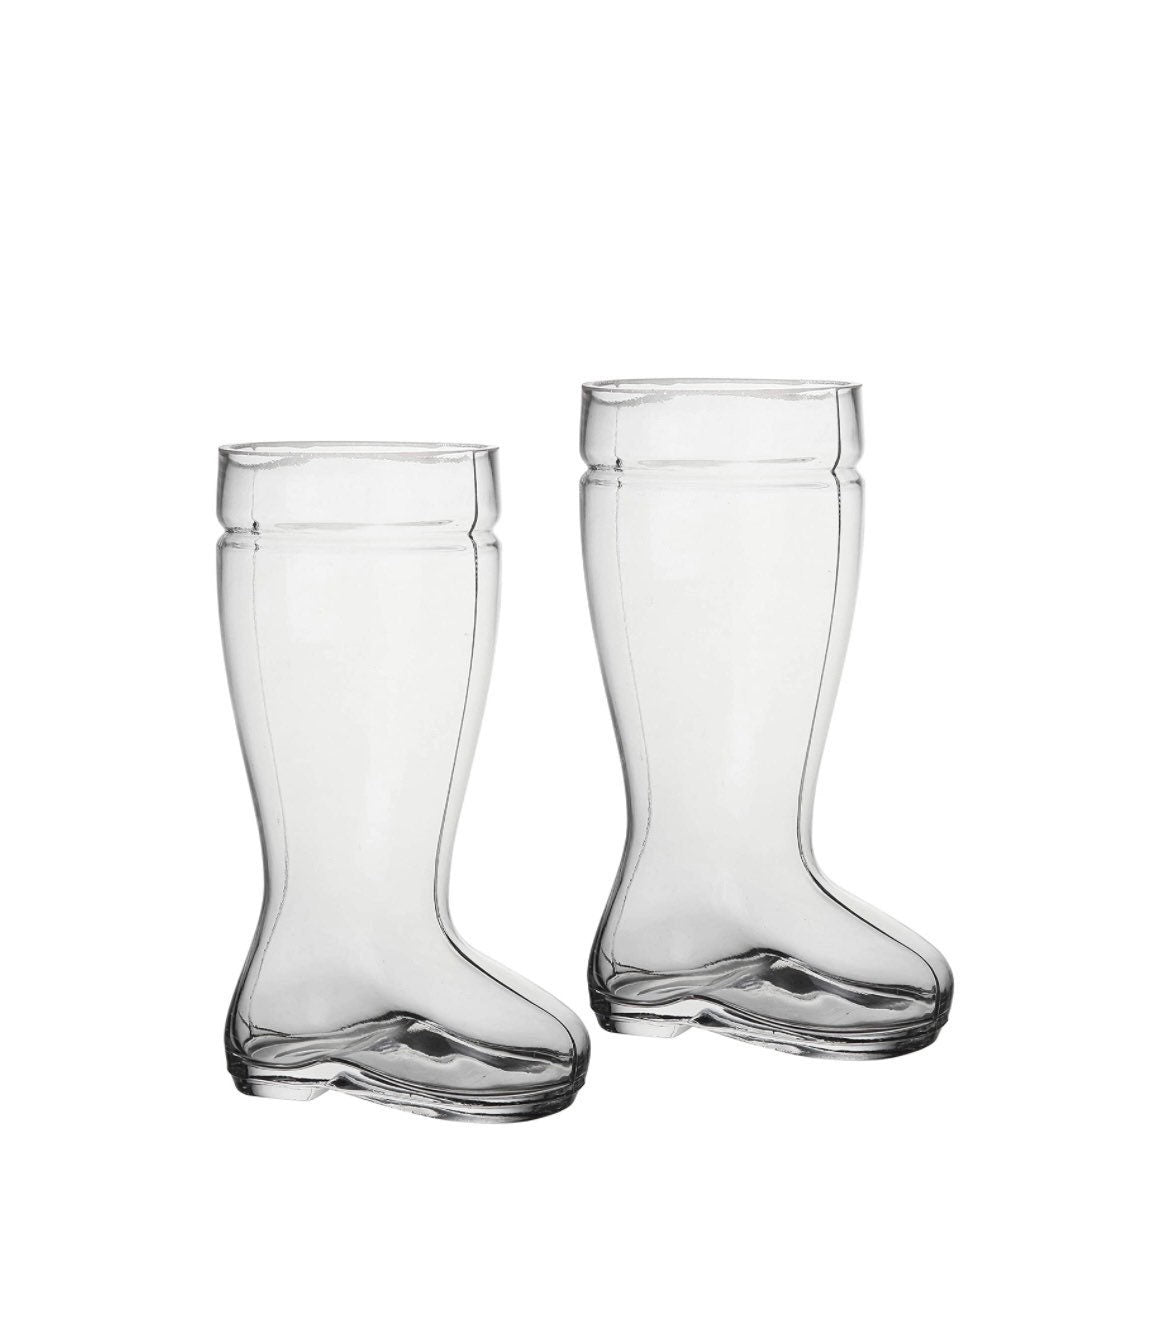 1.5 XL Liter Das Boot Style Beer Glasses. Large German Stein. Set of 2 - Raise The Bar Lux  